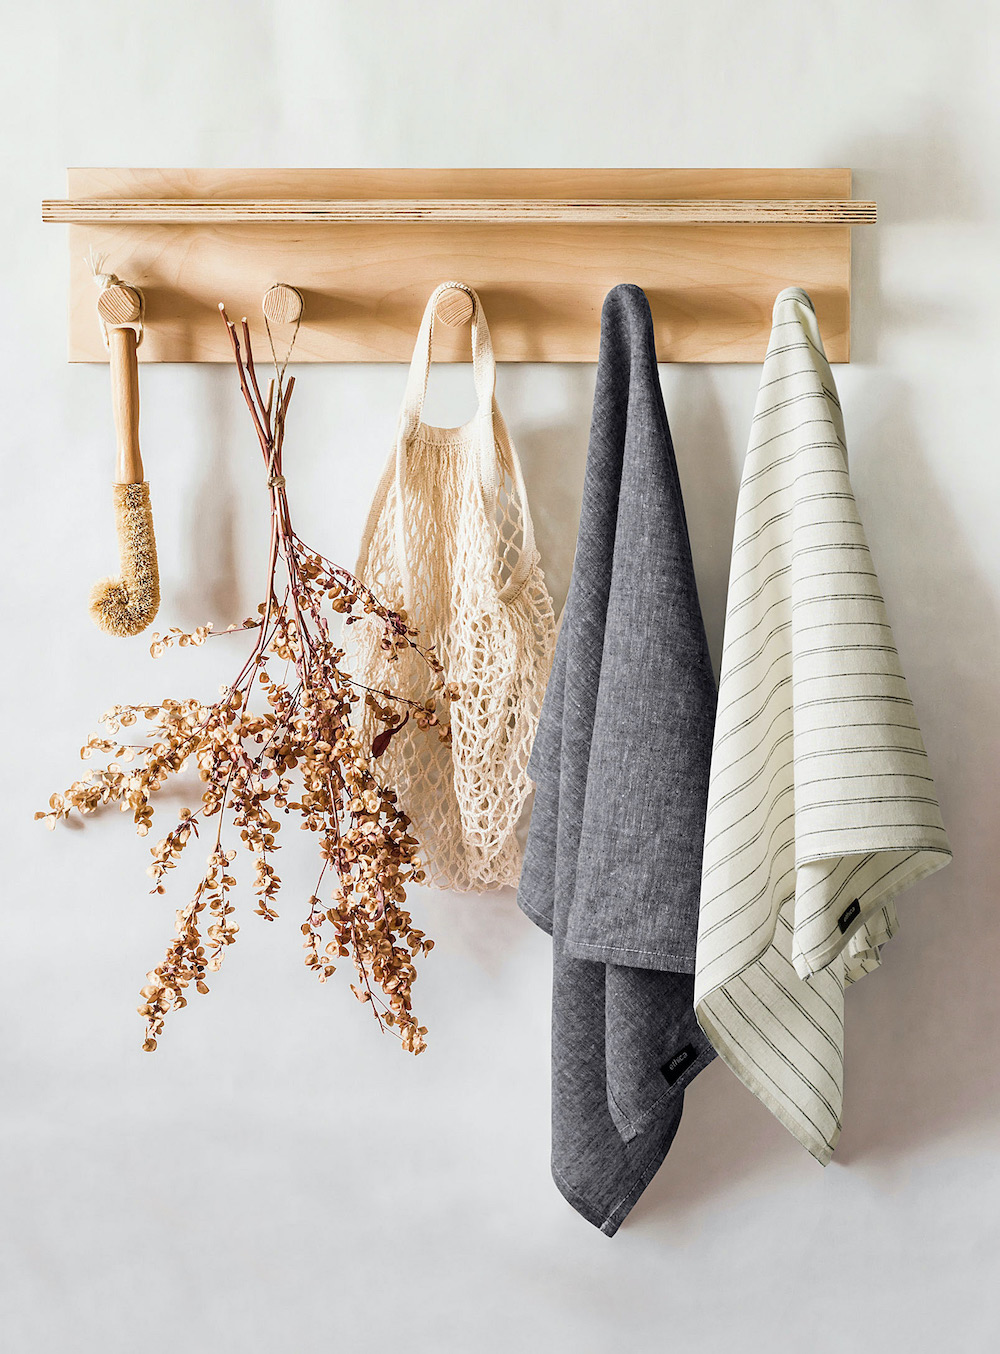 A set of refined yet casual striped hemp and organic cotton cream and grey dish towels hanging from a wooden wall rack along with a net bag, dried flowers and sisal scrub brush